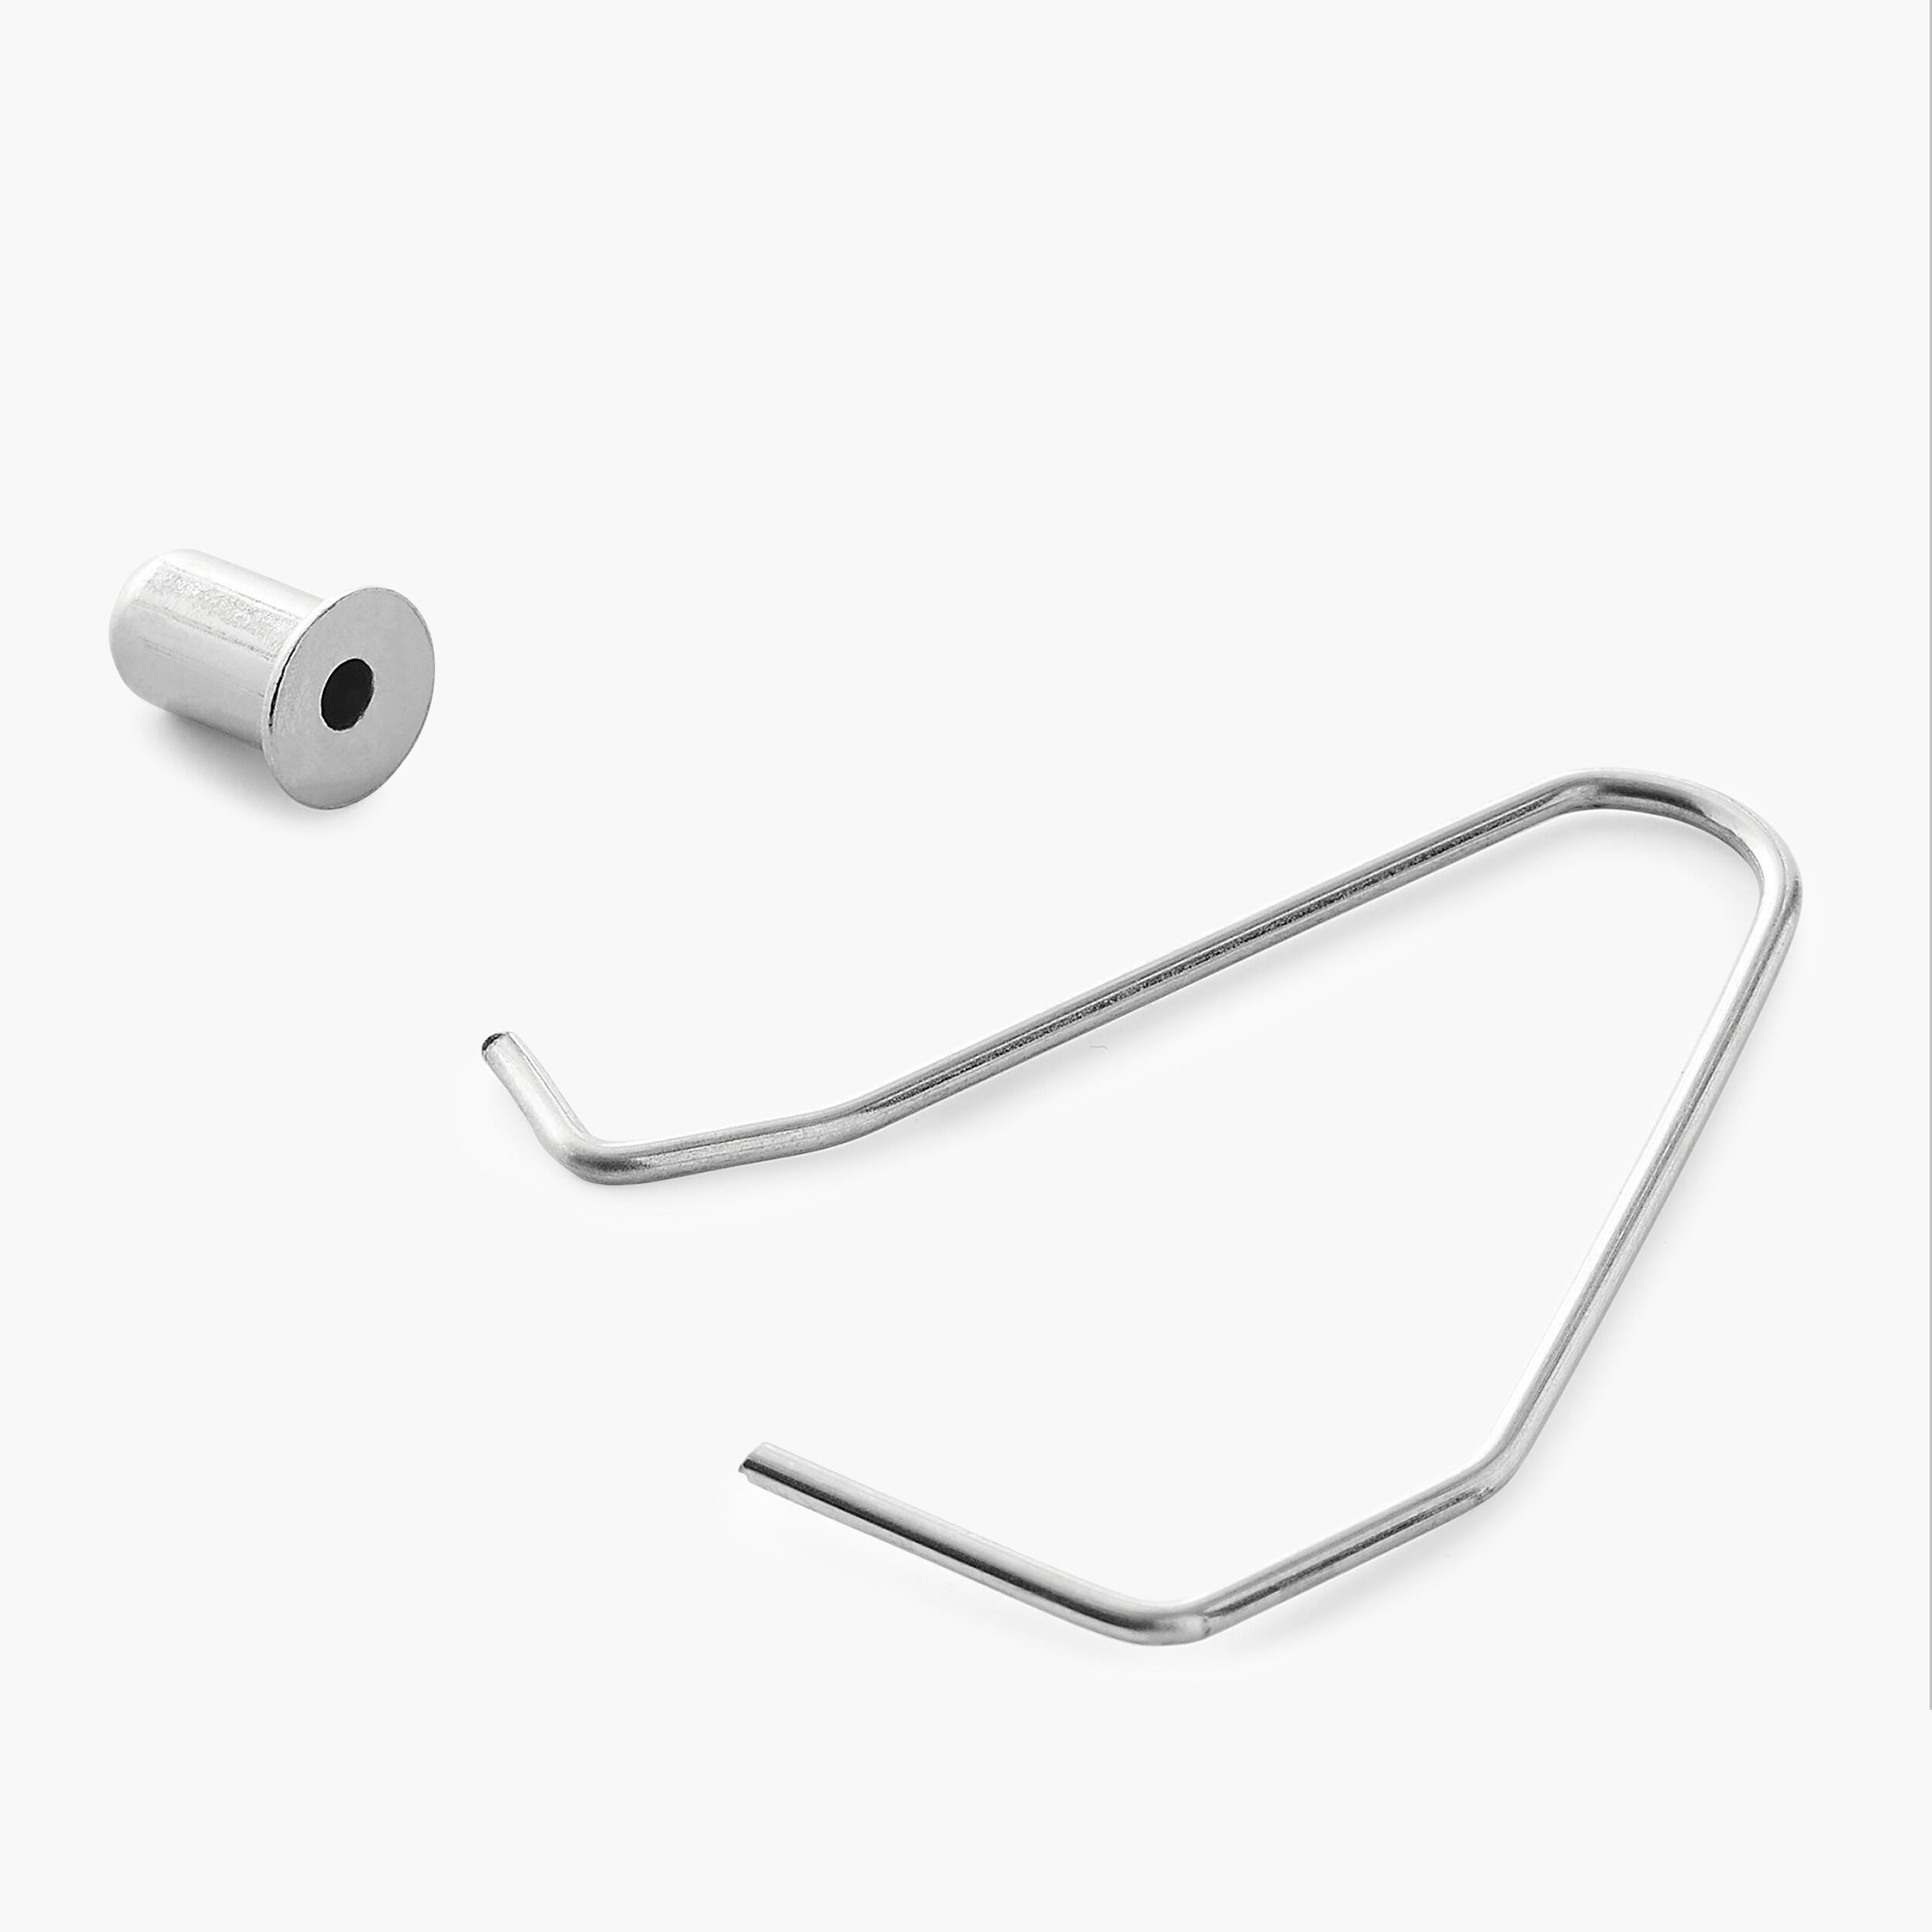 OXELO Push-Pin Kit for Play 3 / Play 5 Scooters Purchased after 2020